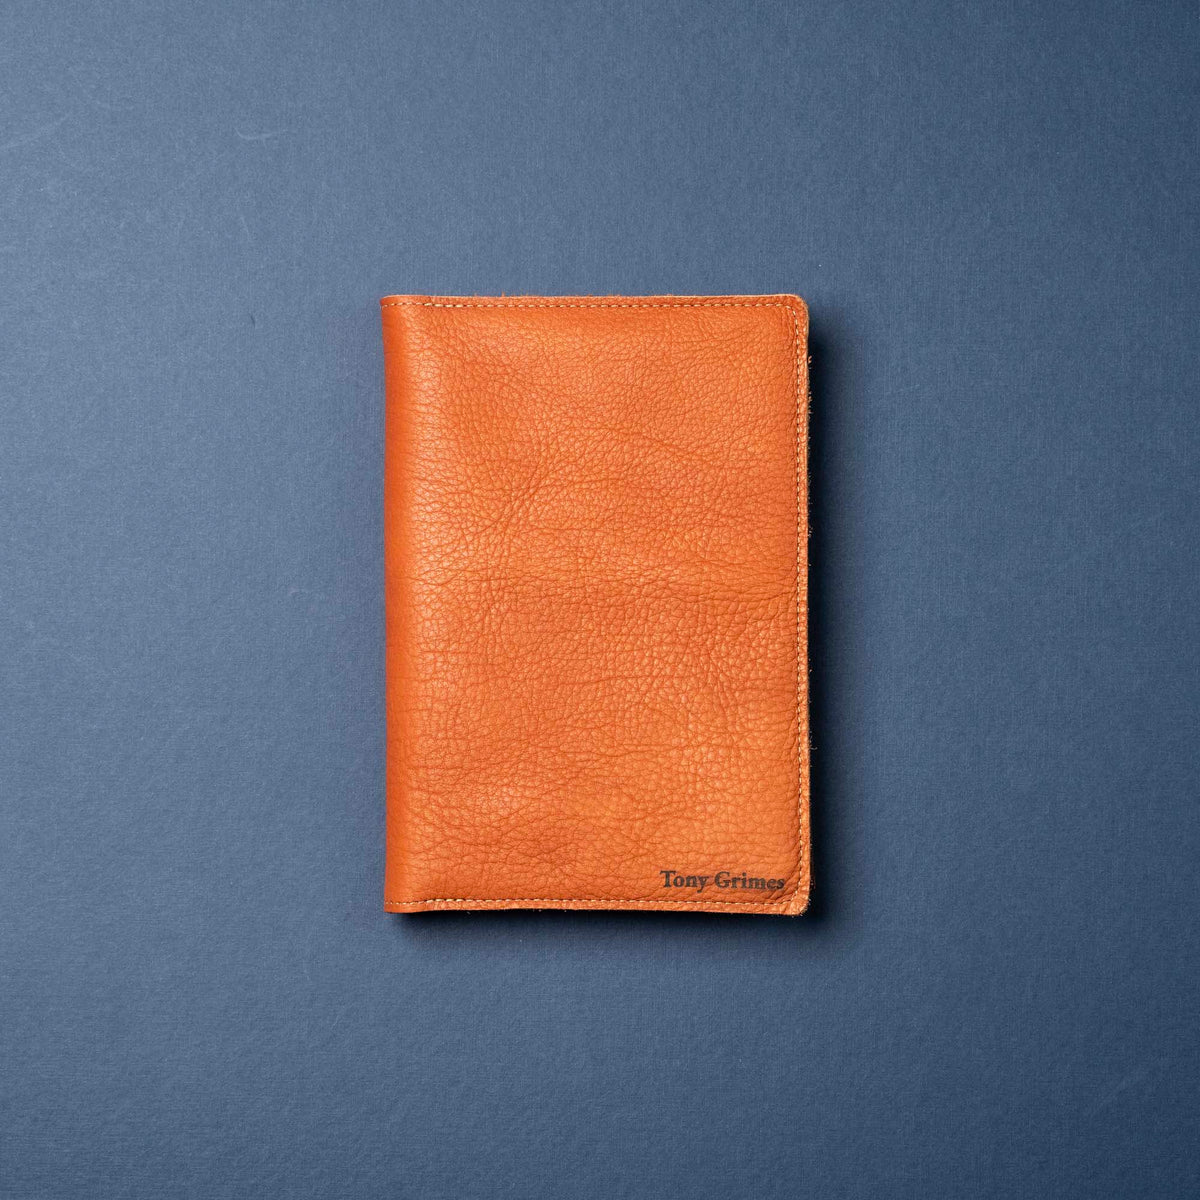 Orange Bison Leather - A5 Leather Journal - Personalized High Character (One-Of-A-Kind) Notebooks - 192 pages 8.75” x 6.25”